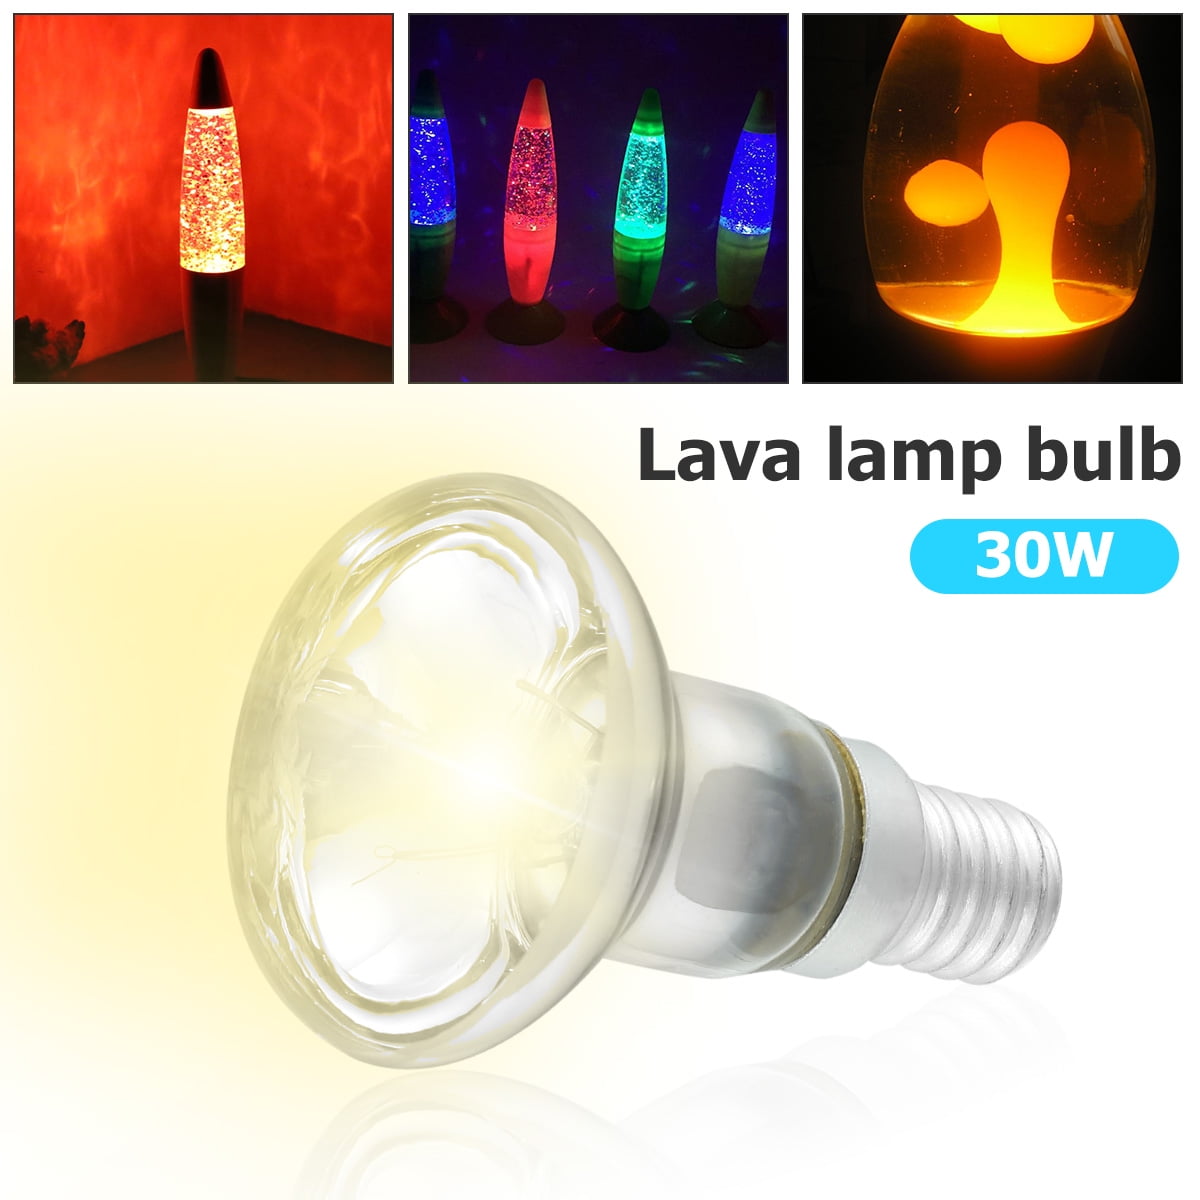 Buy Kawn R39 E14 30W Spotlight Bulb Reflector Spot Light Lava Replacement  Light Bulb Online In India At Discounted Prices